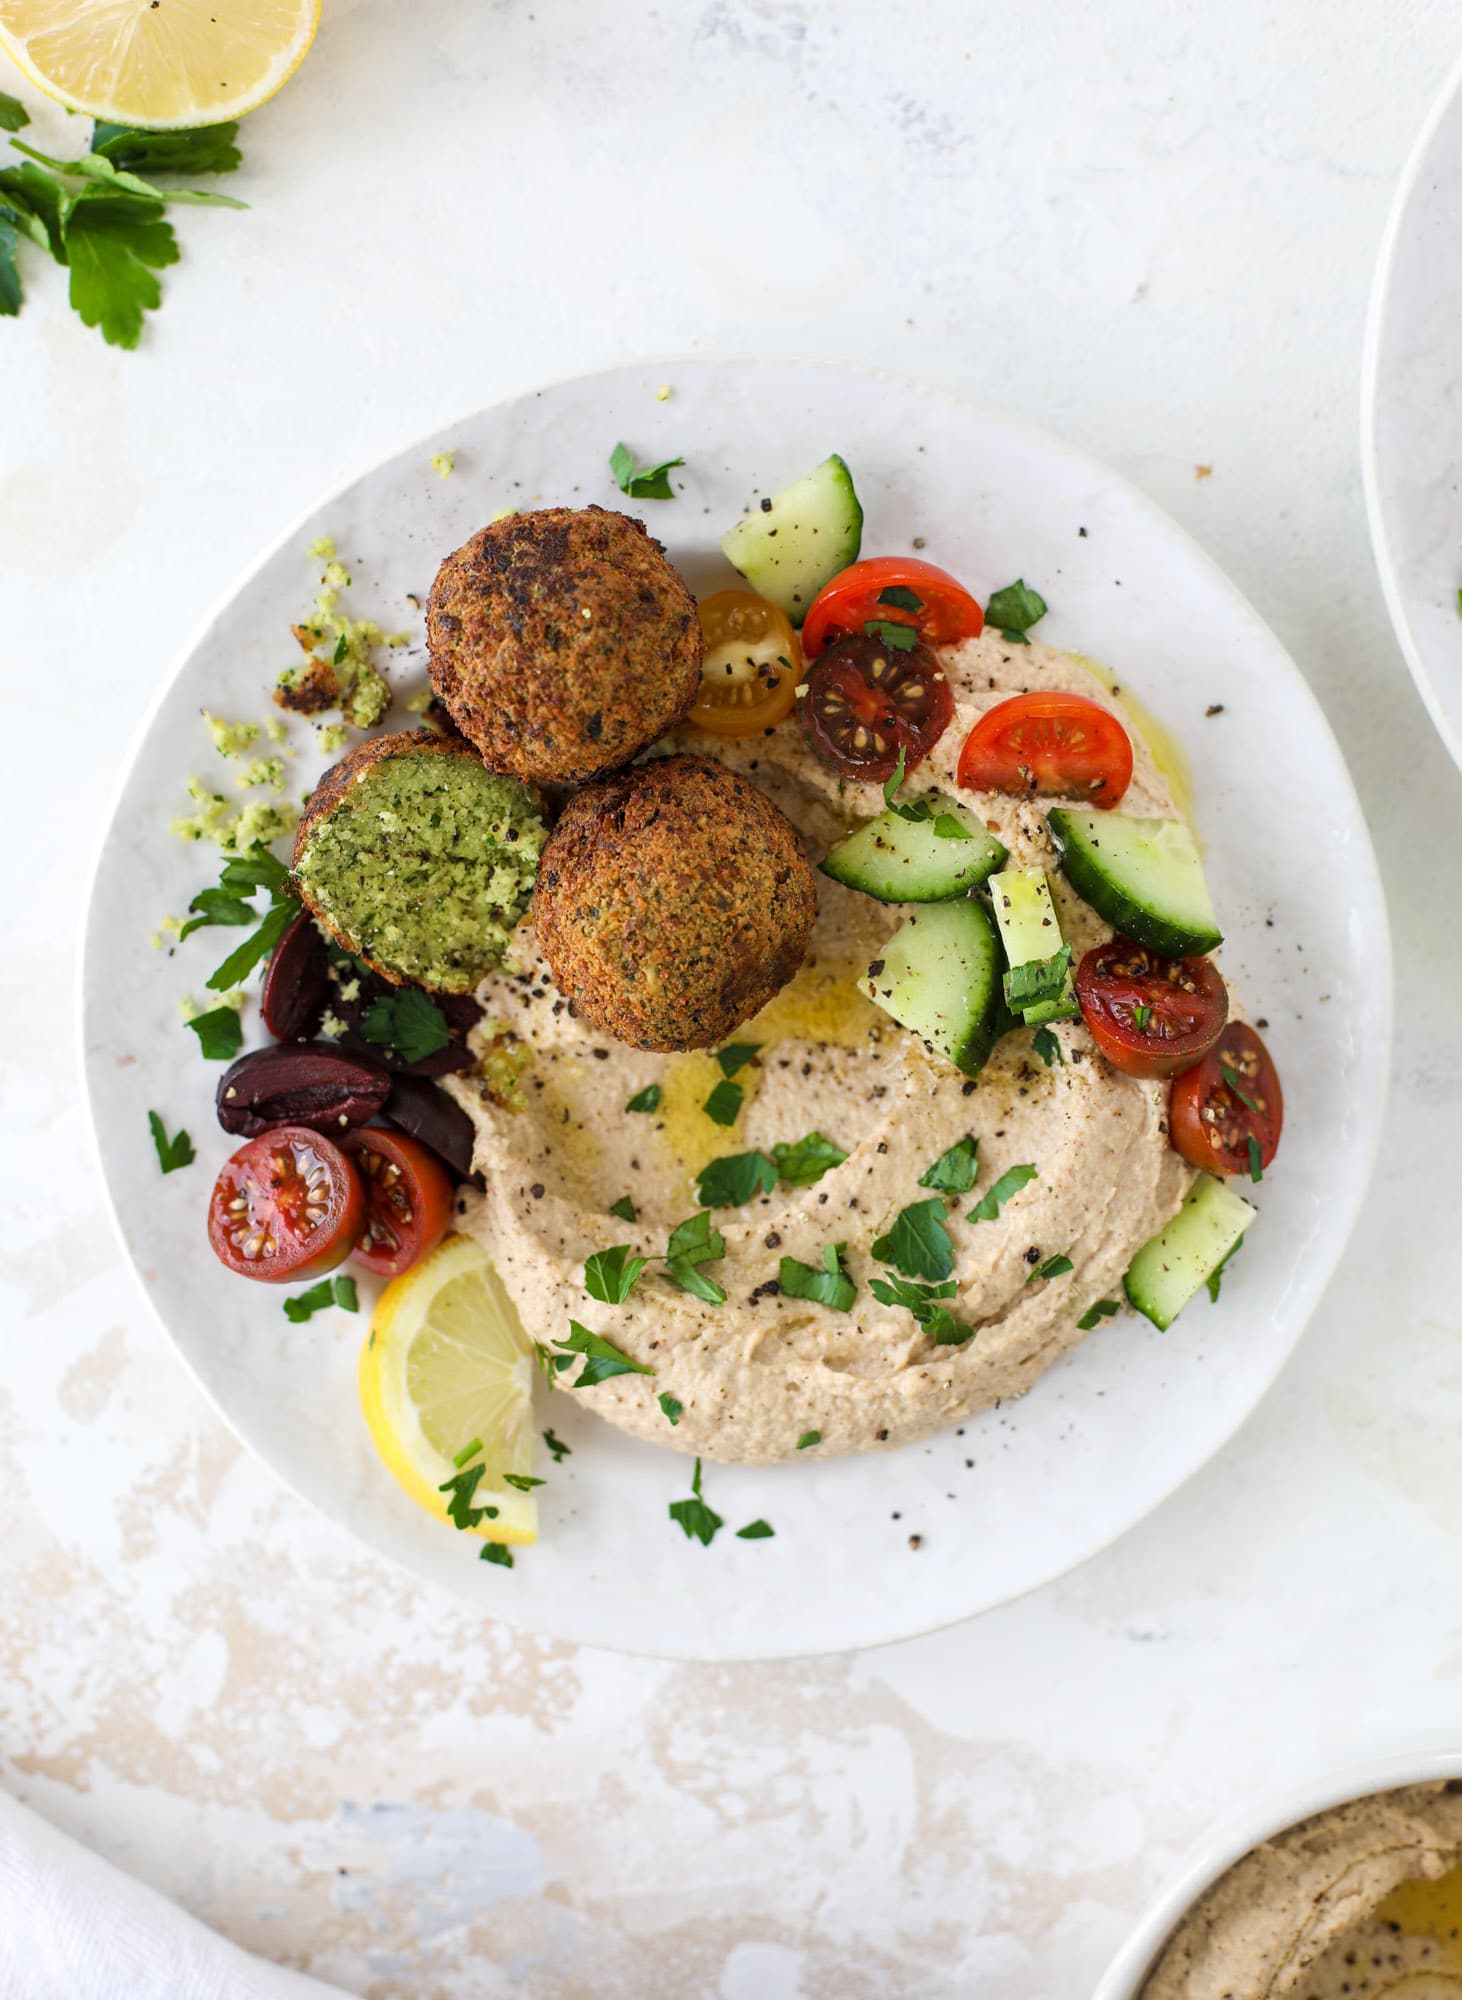 Green goddess falafel is hearty and flavorful, served over the creamiest cauliflower hummus, with tomatoes, olive, cucumbers and feta. Yum! I howsweeteats.com #falafel #cauliflowerhummus